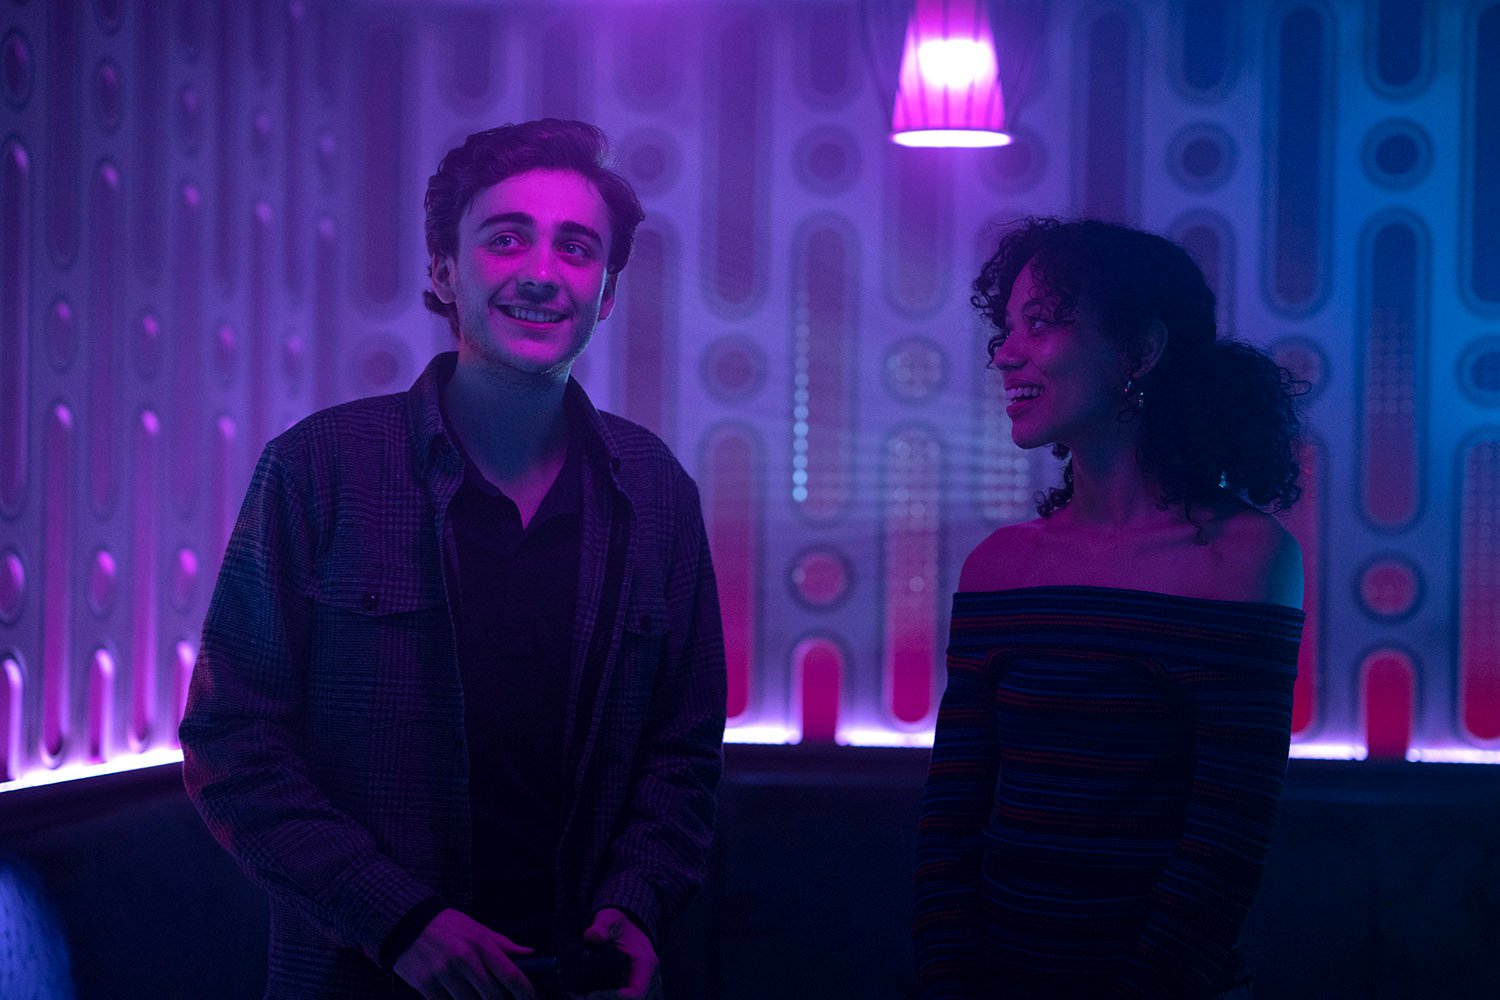 Stephen King questioned this scene in Manifest Season 4 where Ty Doran's Cal Stone sits inside a karaoke bar and drinks with Sarah Marie Rodriguez's Violet Wheeler.